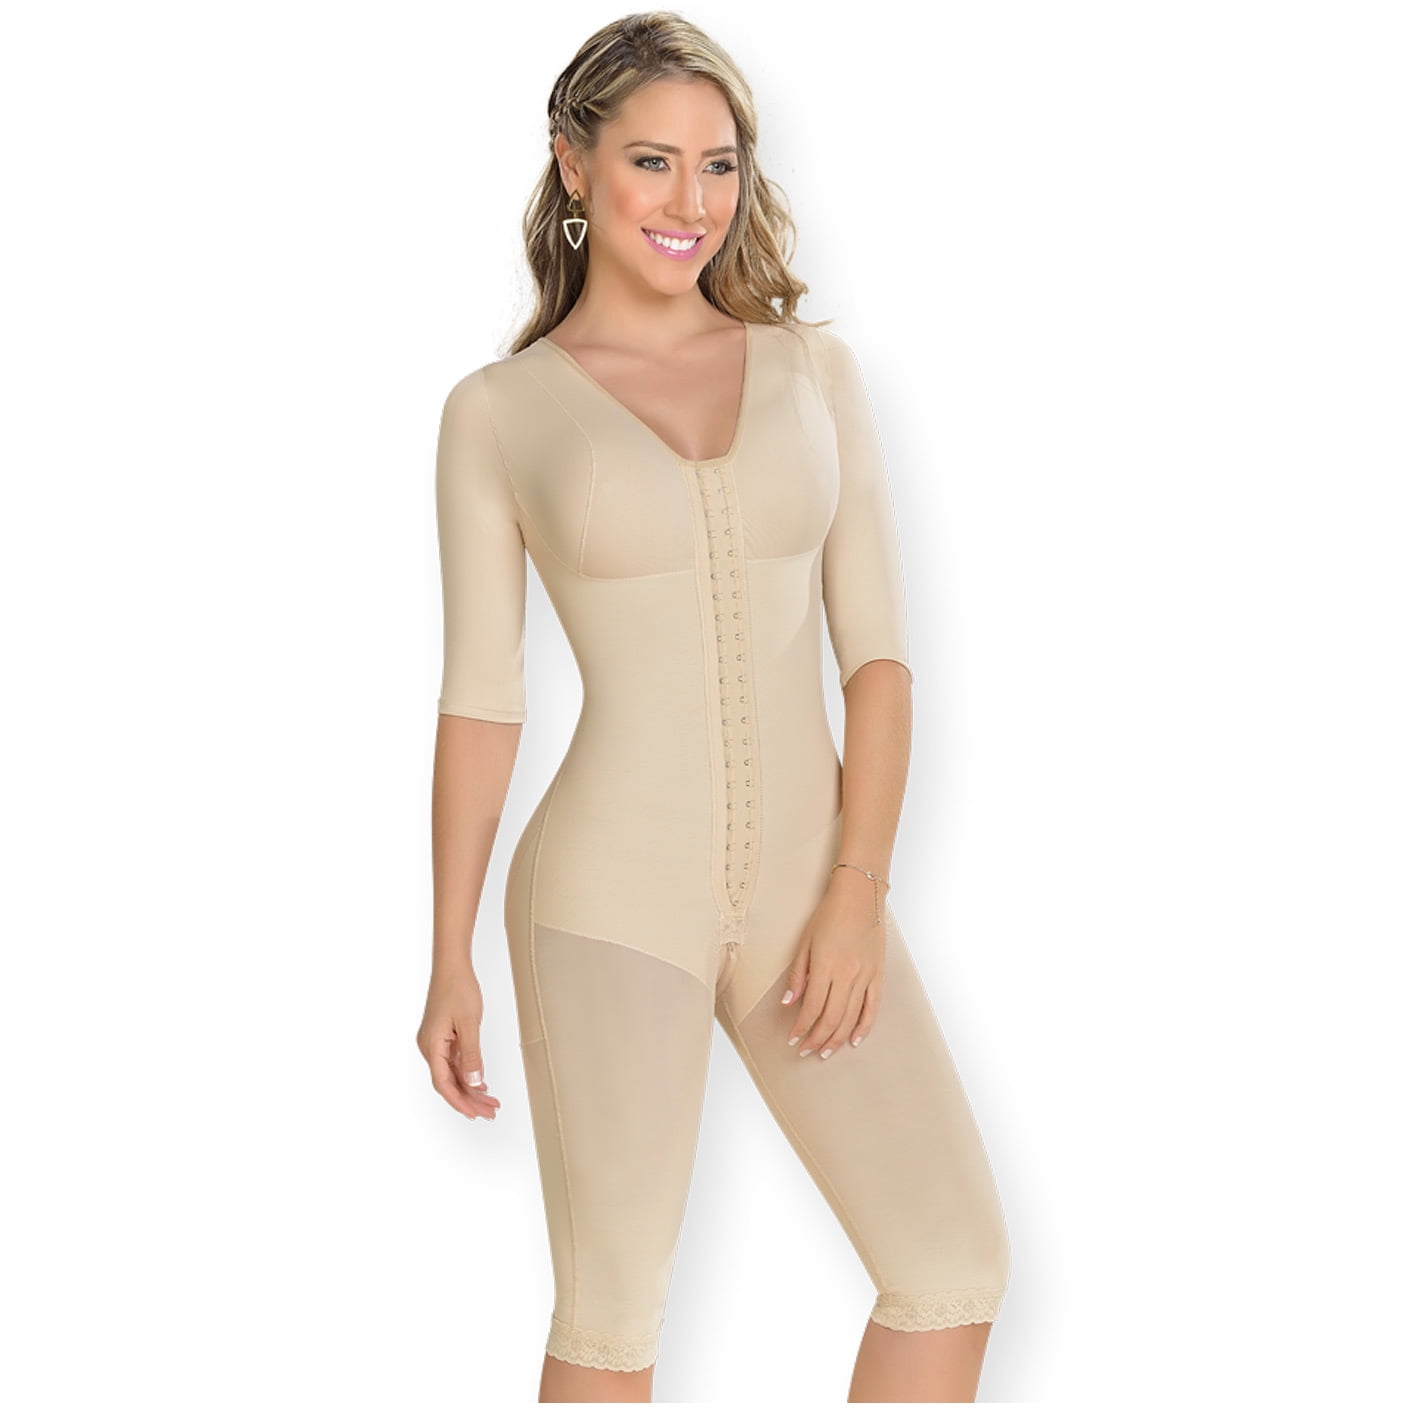 Details about   Fajas Colombianas Post-Surgery Full Body Arm Shaper Powernet Girdle Body Suit 